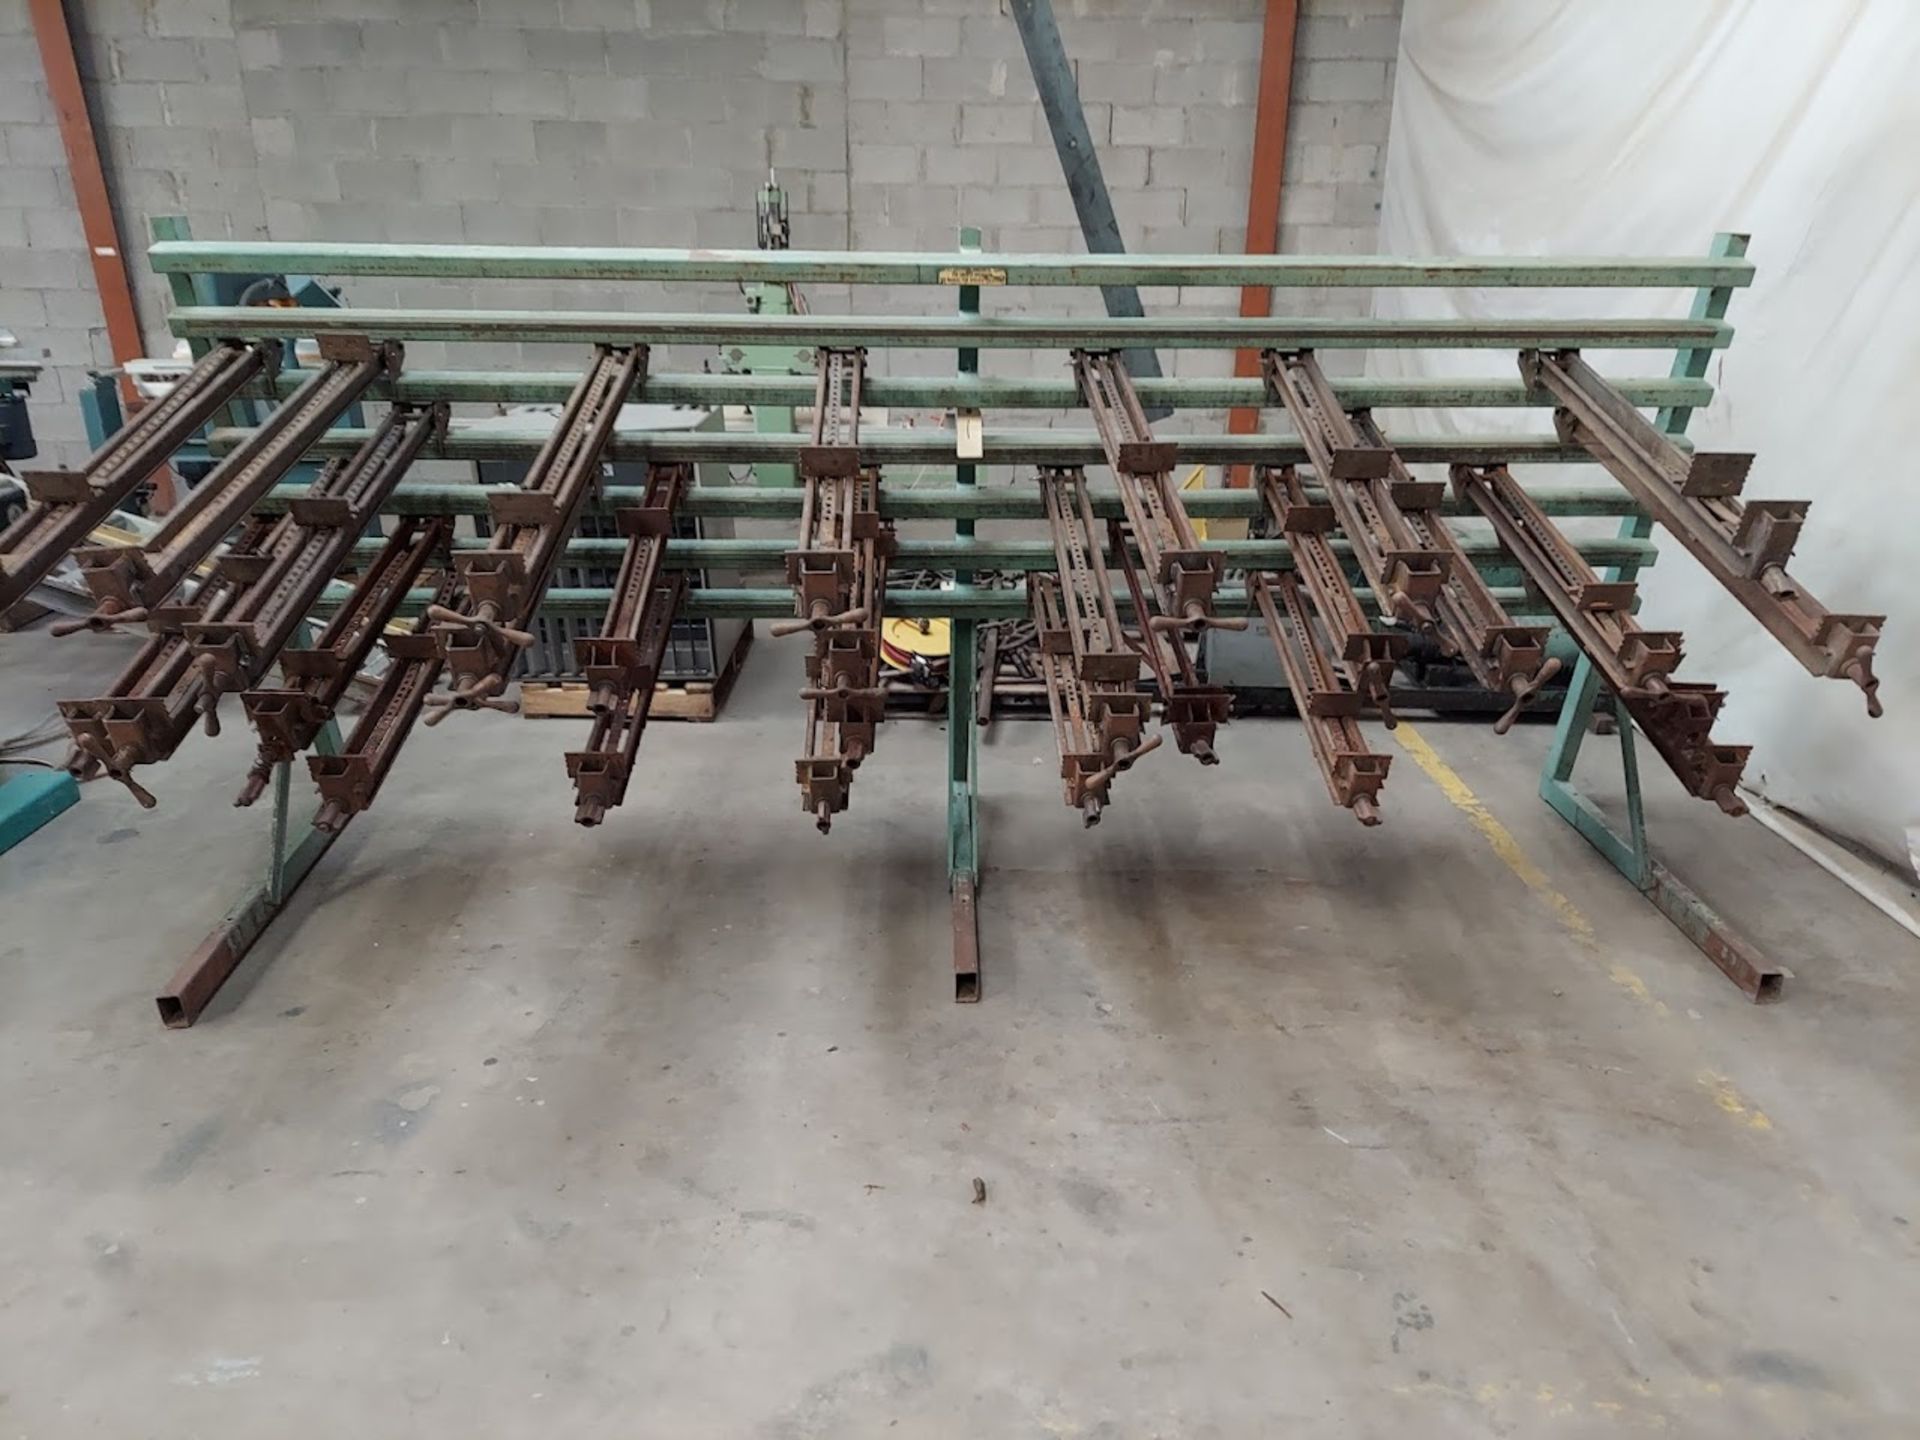 James L. Taylor 12' Panel Clamp, Model #79A, Comes with 29 Clamps, 16 - 32" Clamps & 13" 40" Clamps